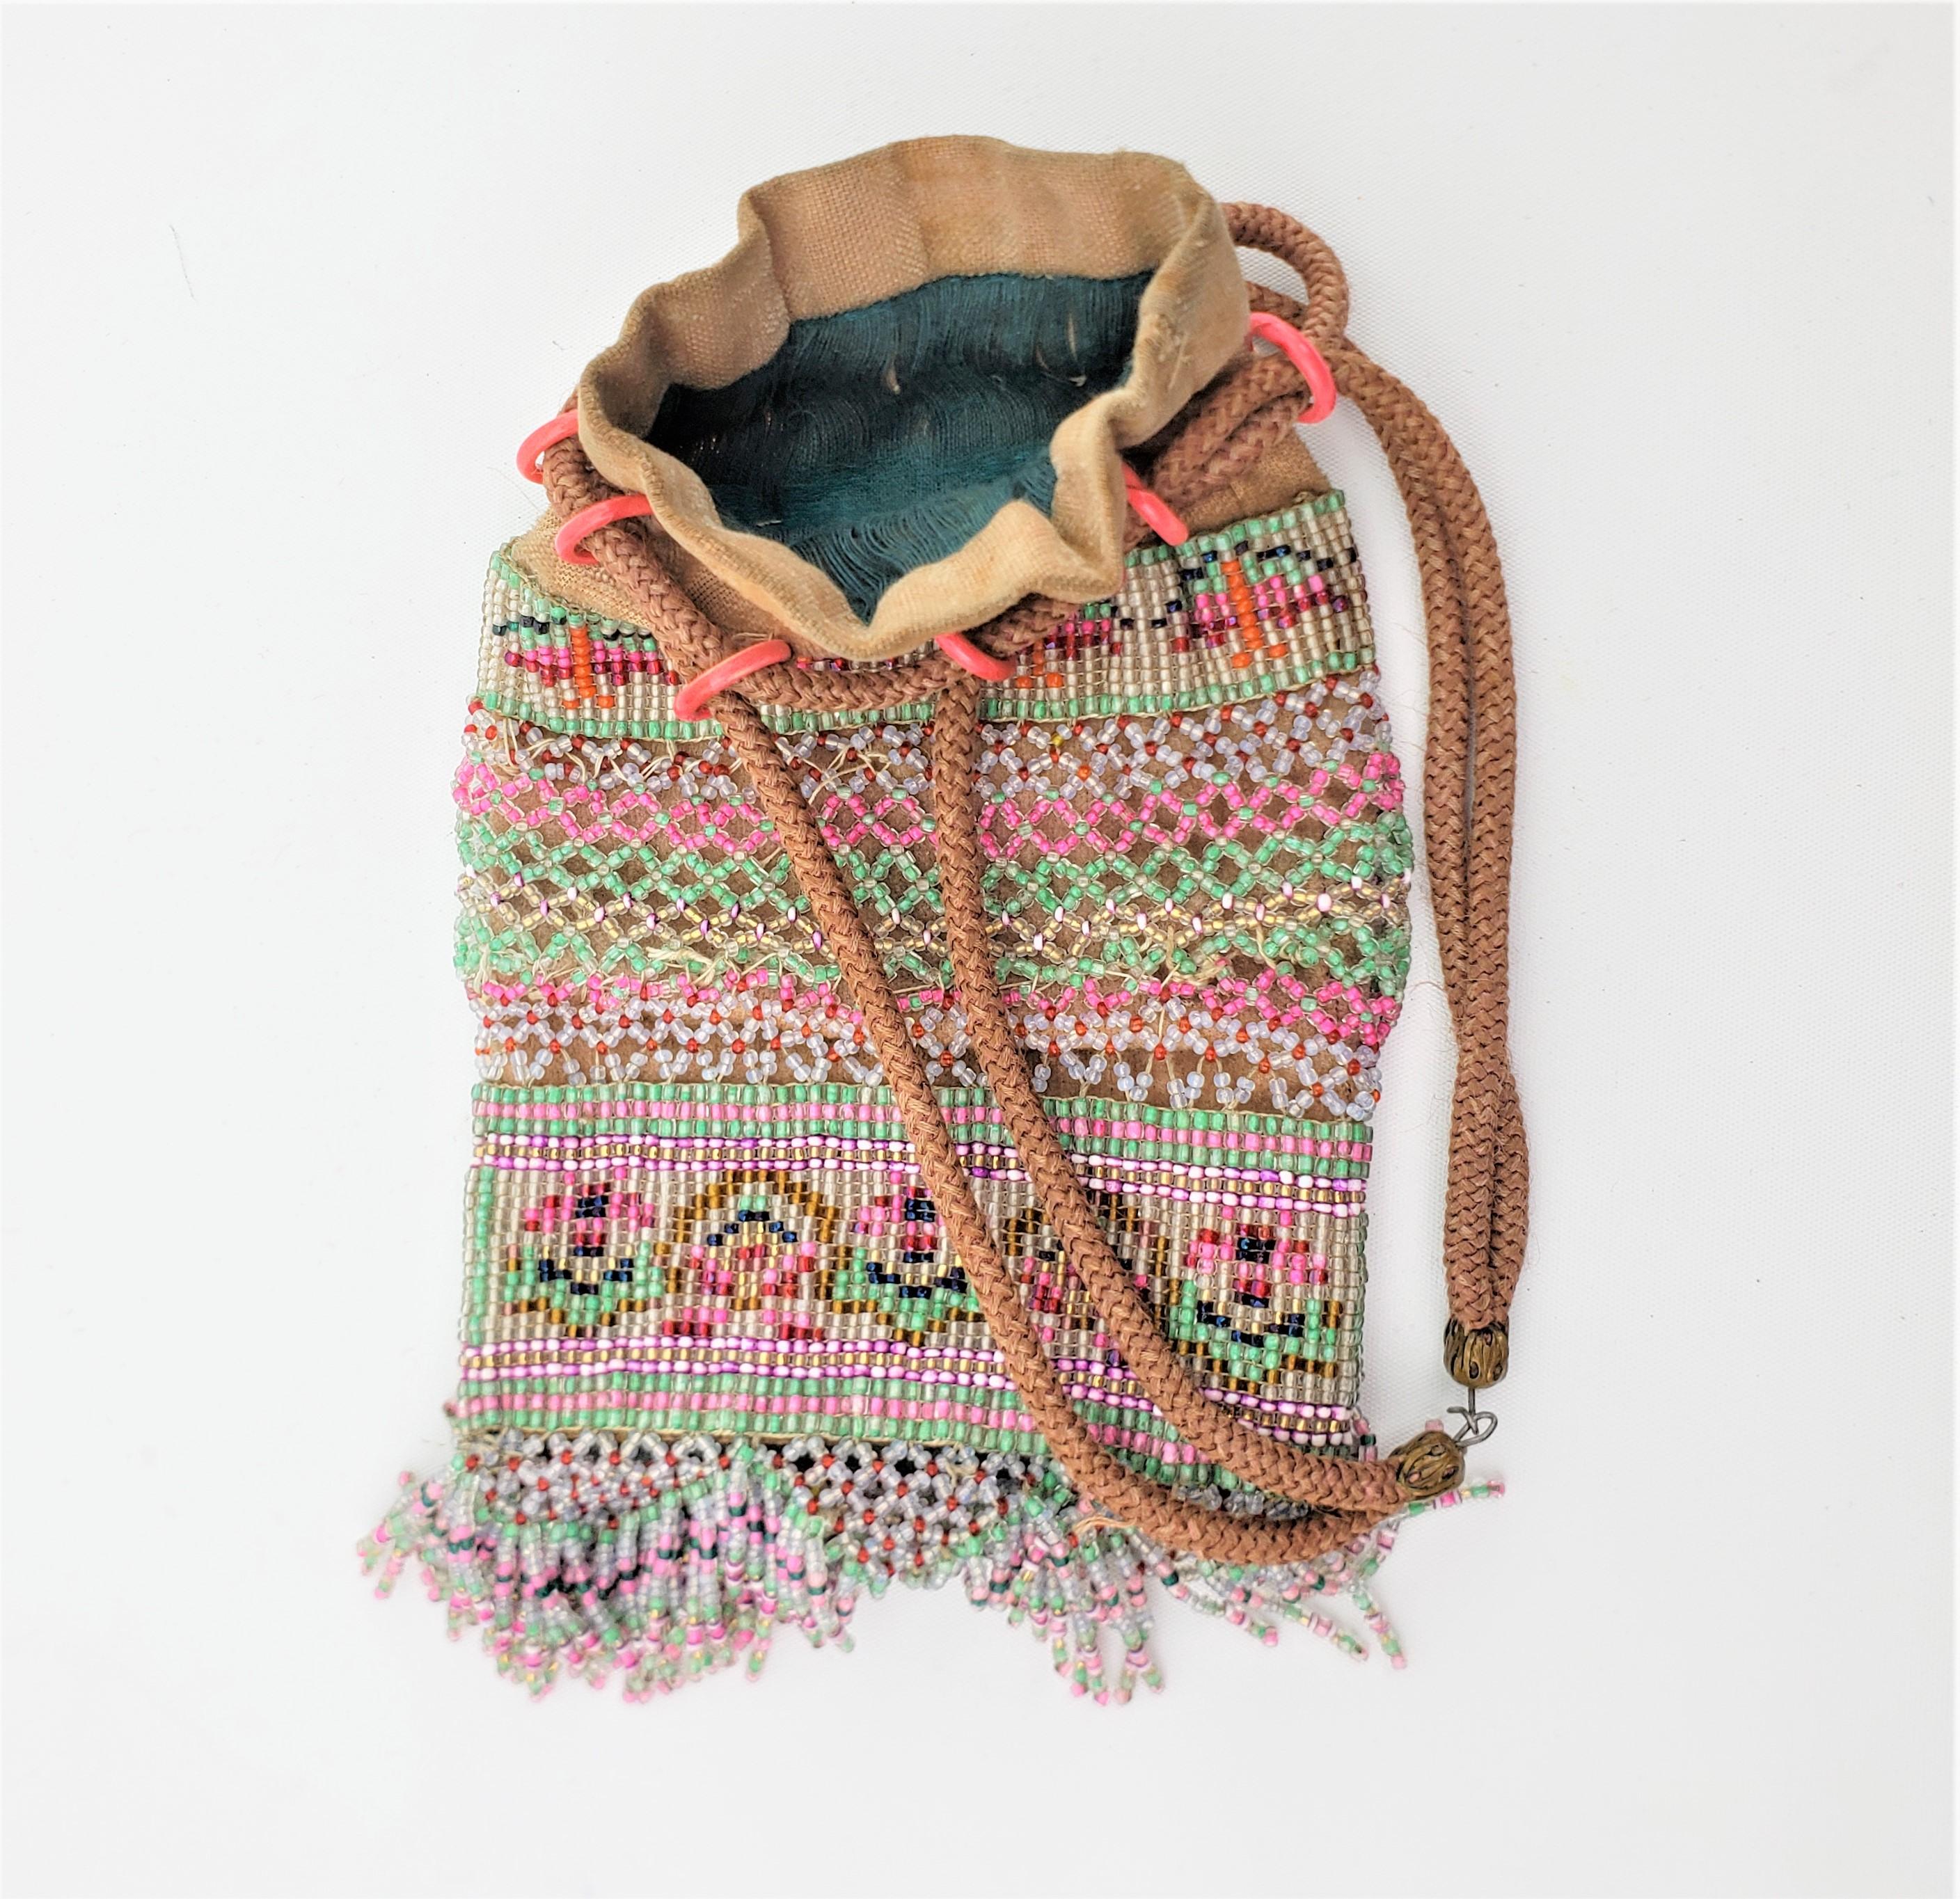 indigenous tobacco pouch